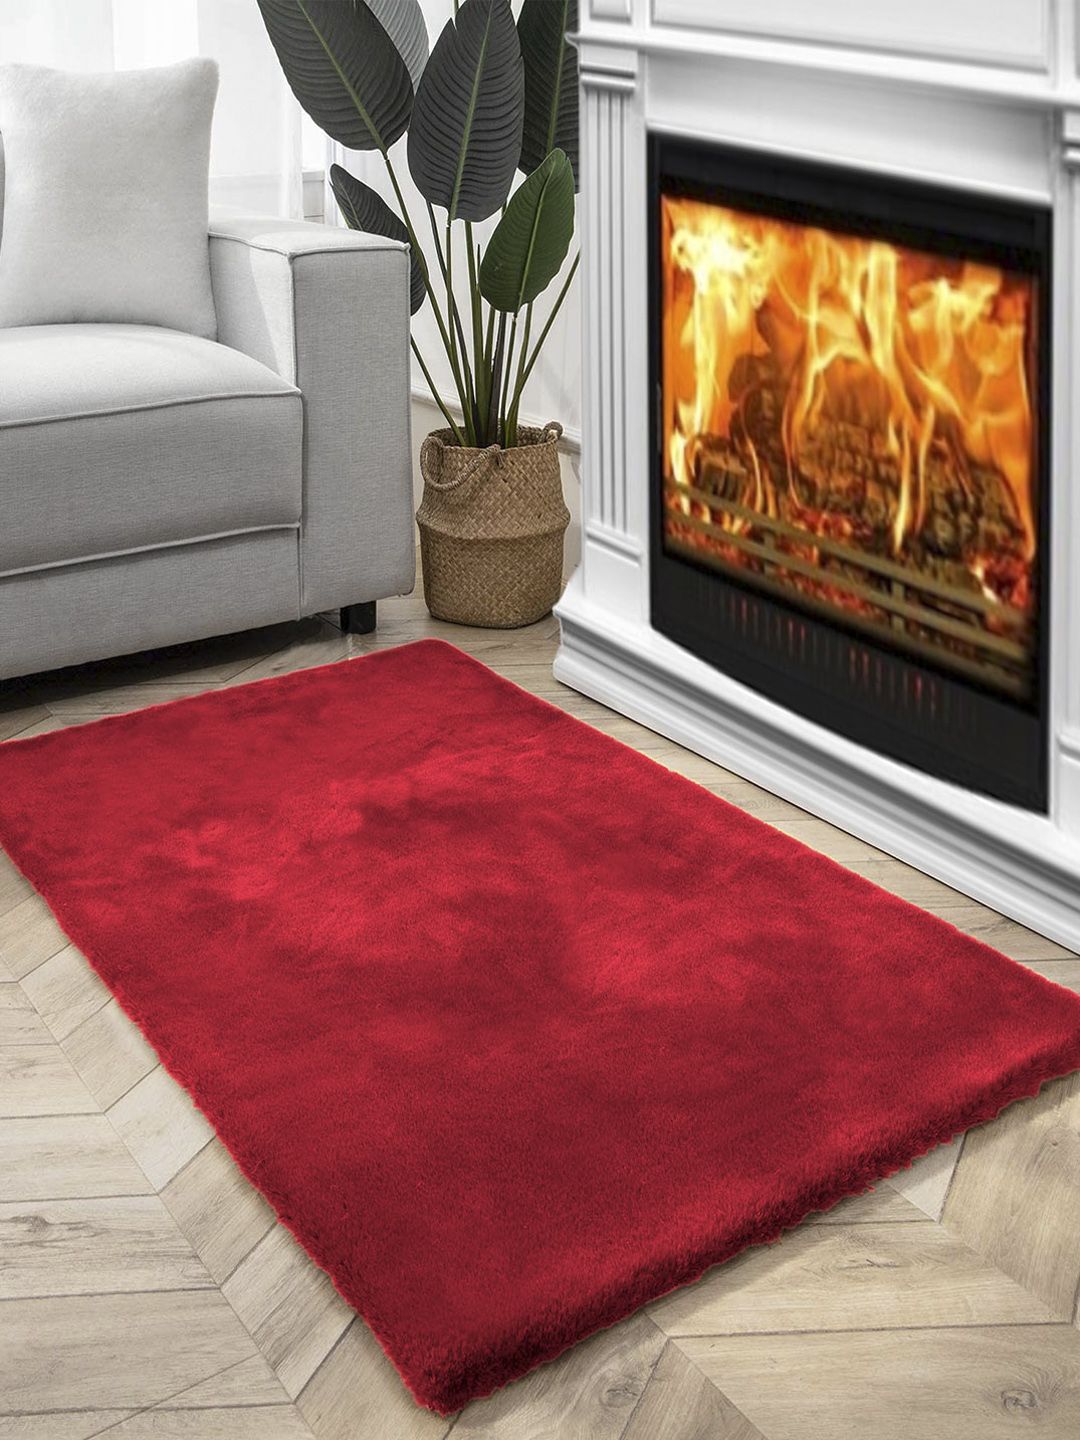 FI Maroon Polycotton Solid Bath Rugs Price in India